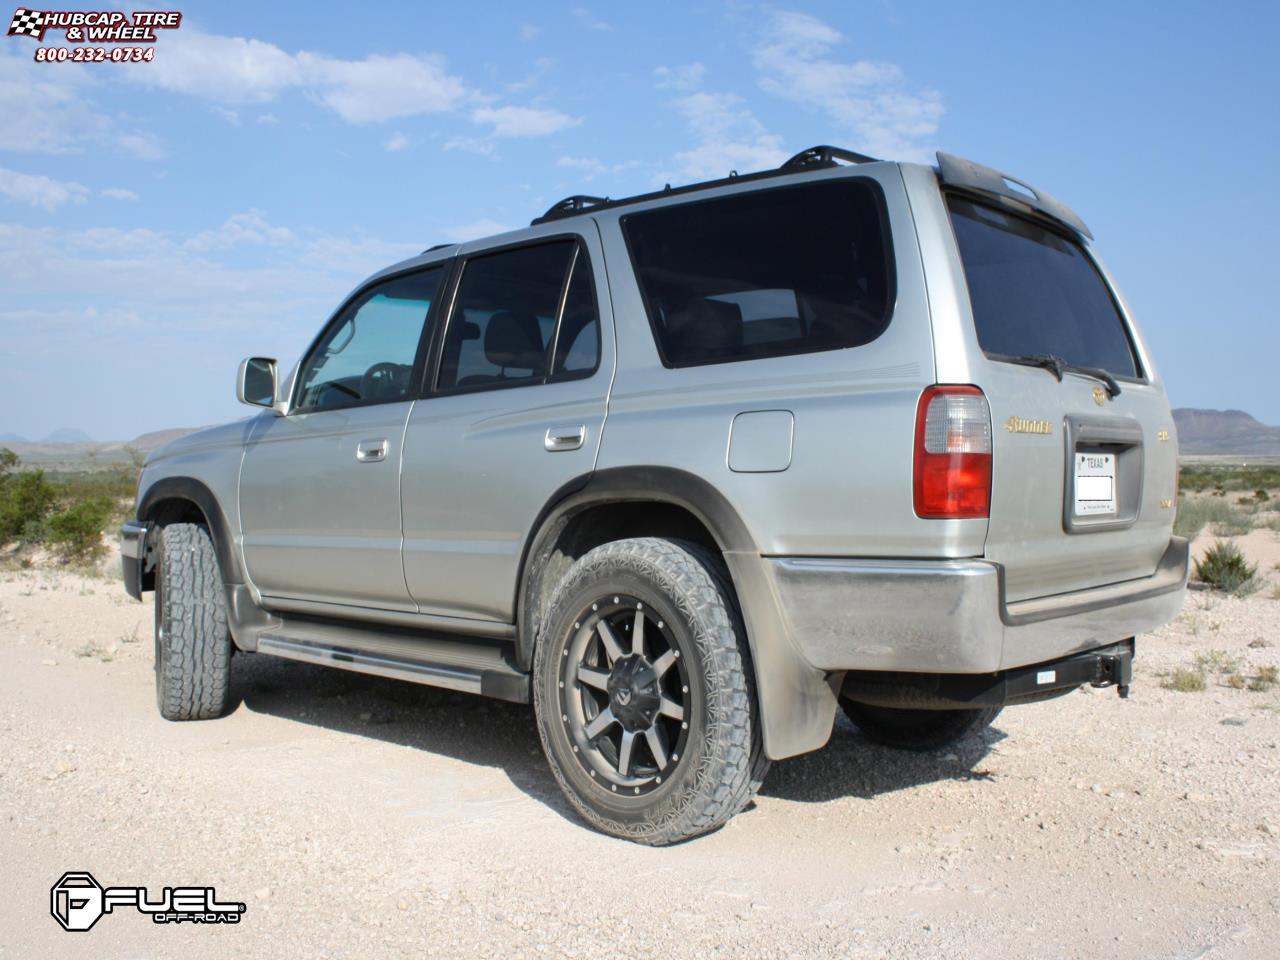 vehicle gallery/toyota 4 runner fuel maverick d261 0X0  Black & Machined wheels and rims